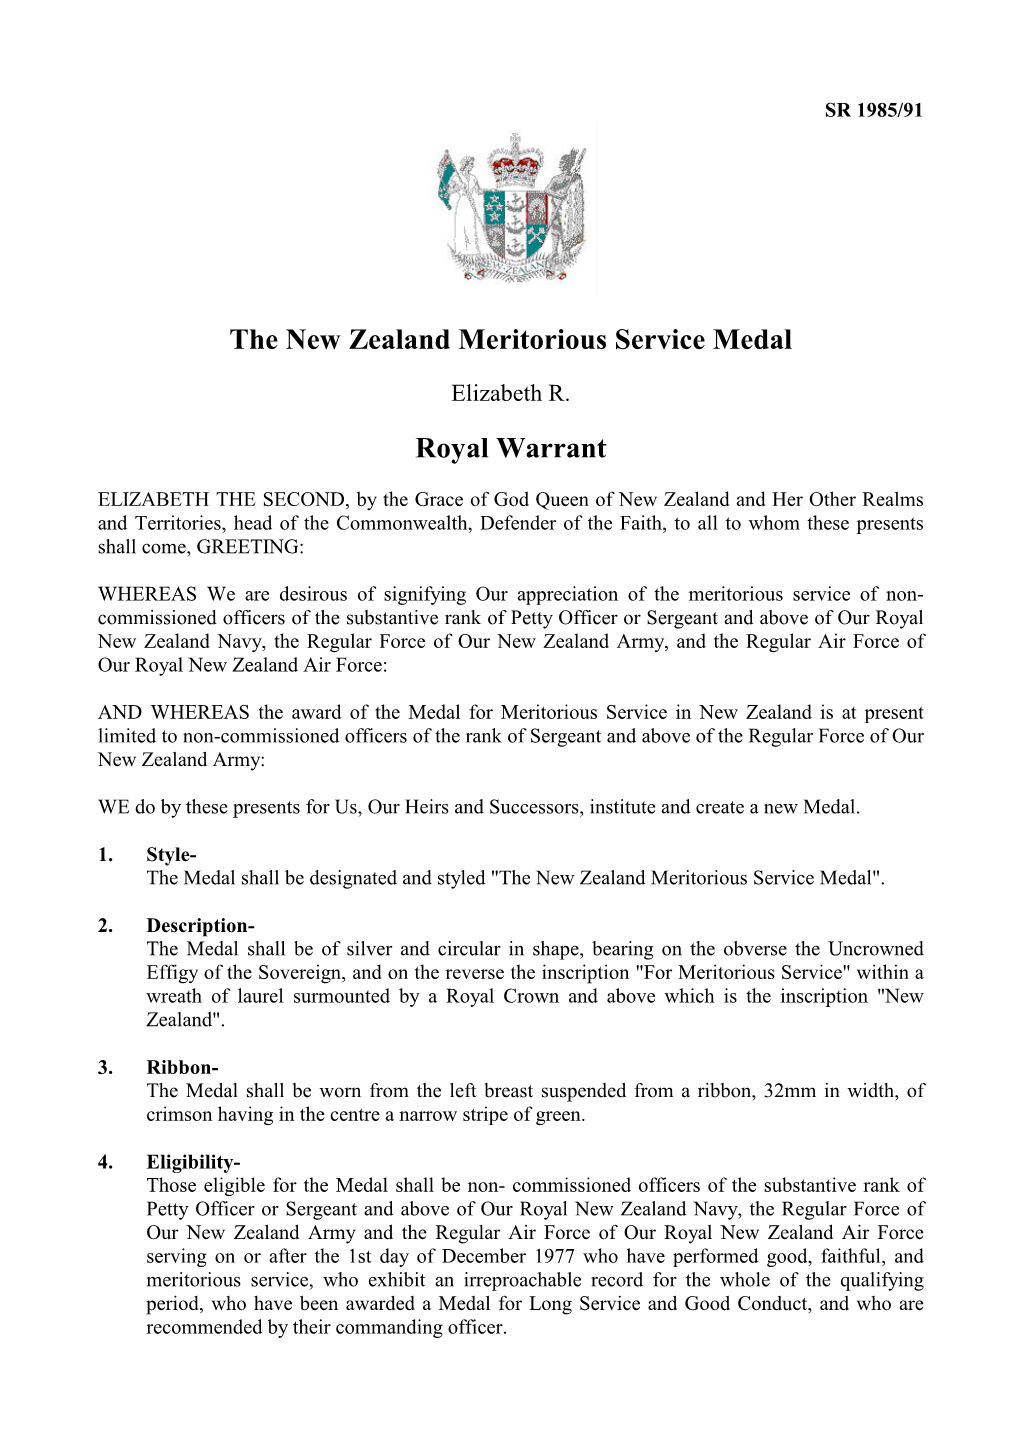 The New Zealand Meritorious Service Medal